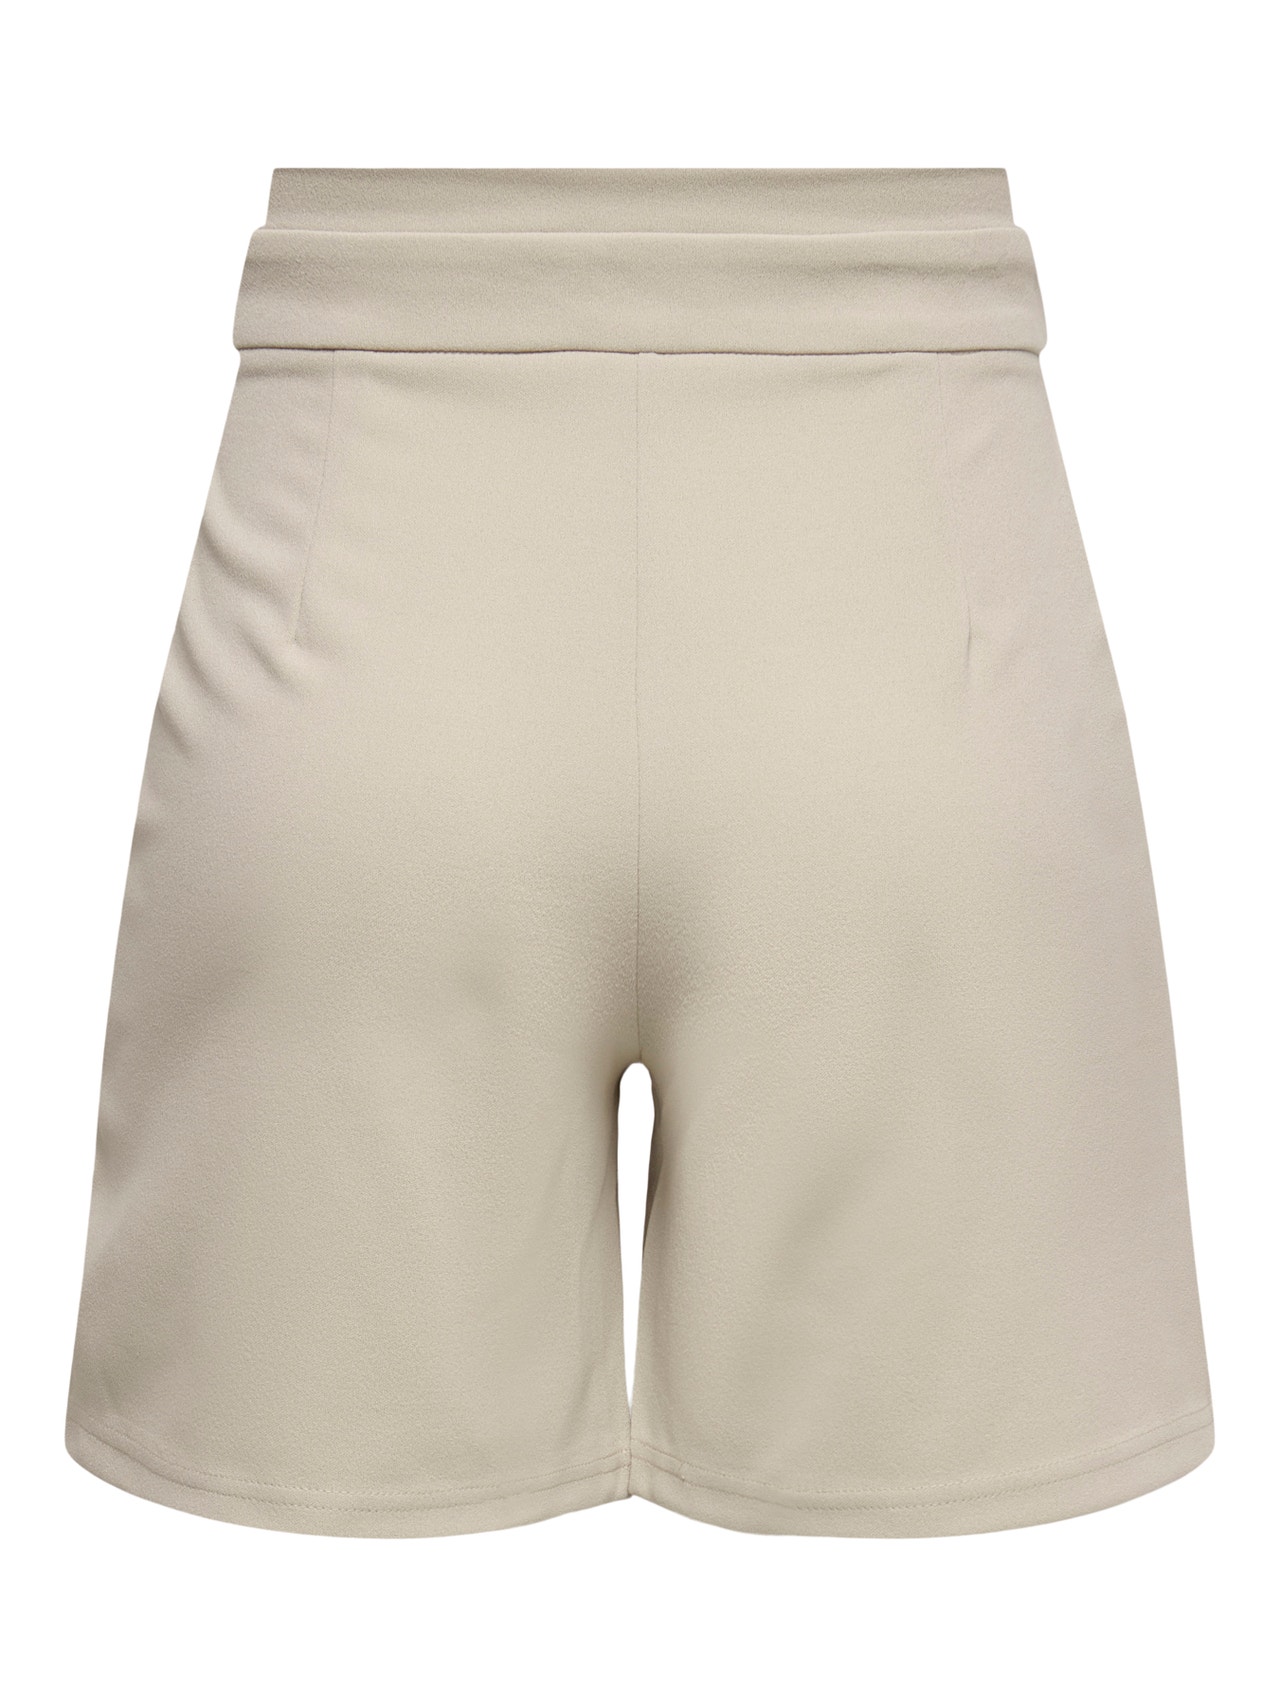 ONLY Shorts Regular Fit -Chateau Gray - 15257246